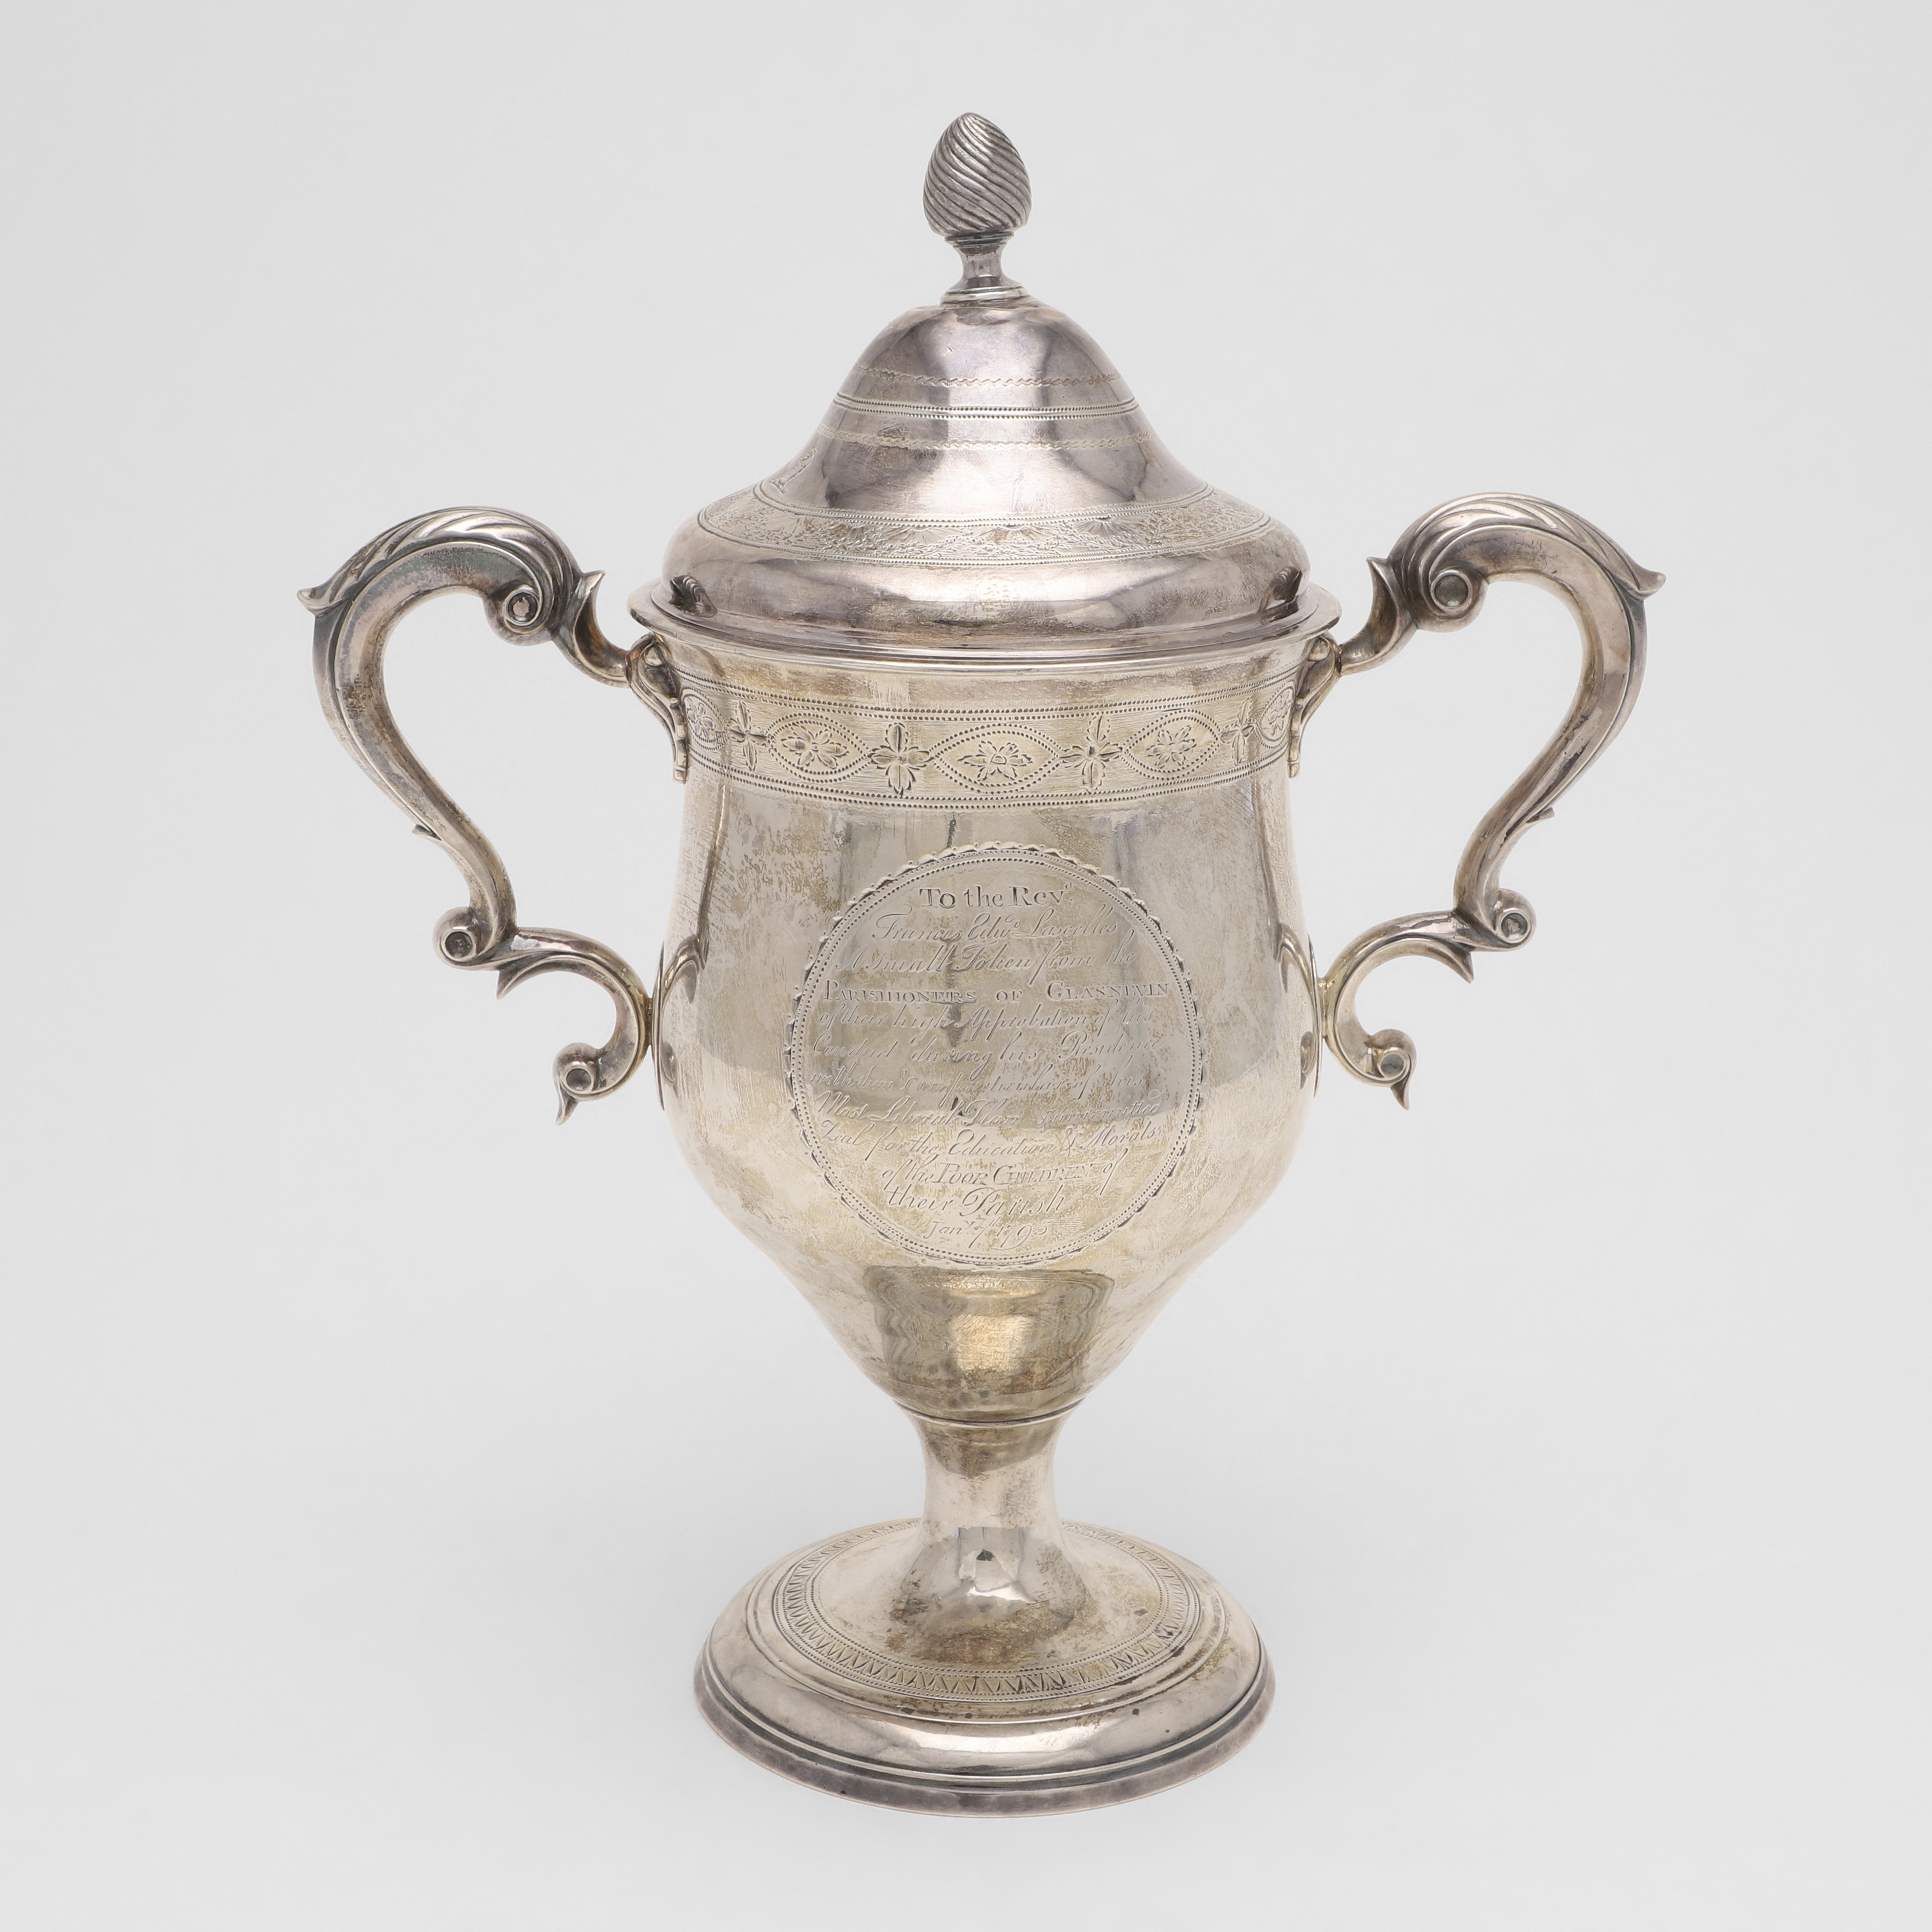 A GEORGE III IRISH TWO-HANDLED CUP & COVER.